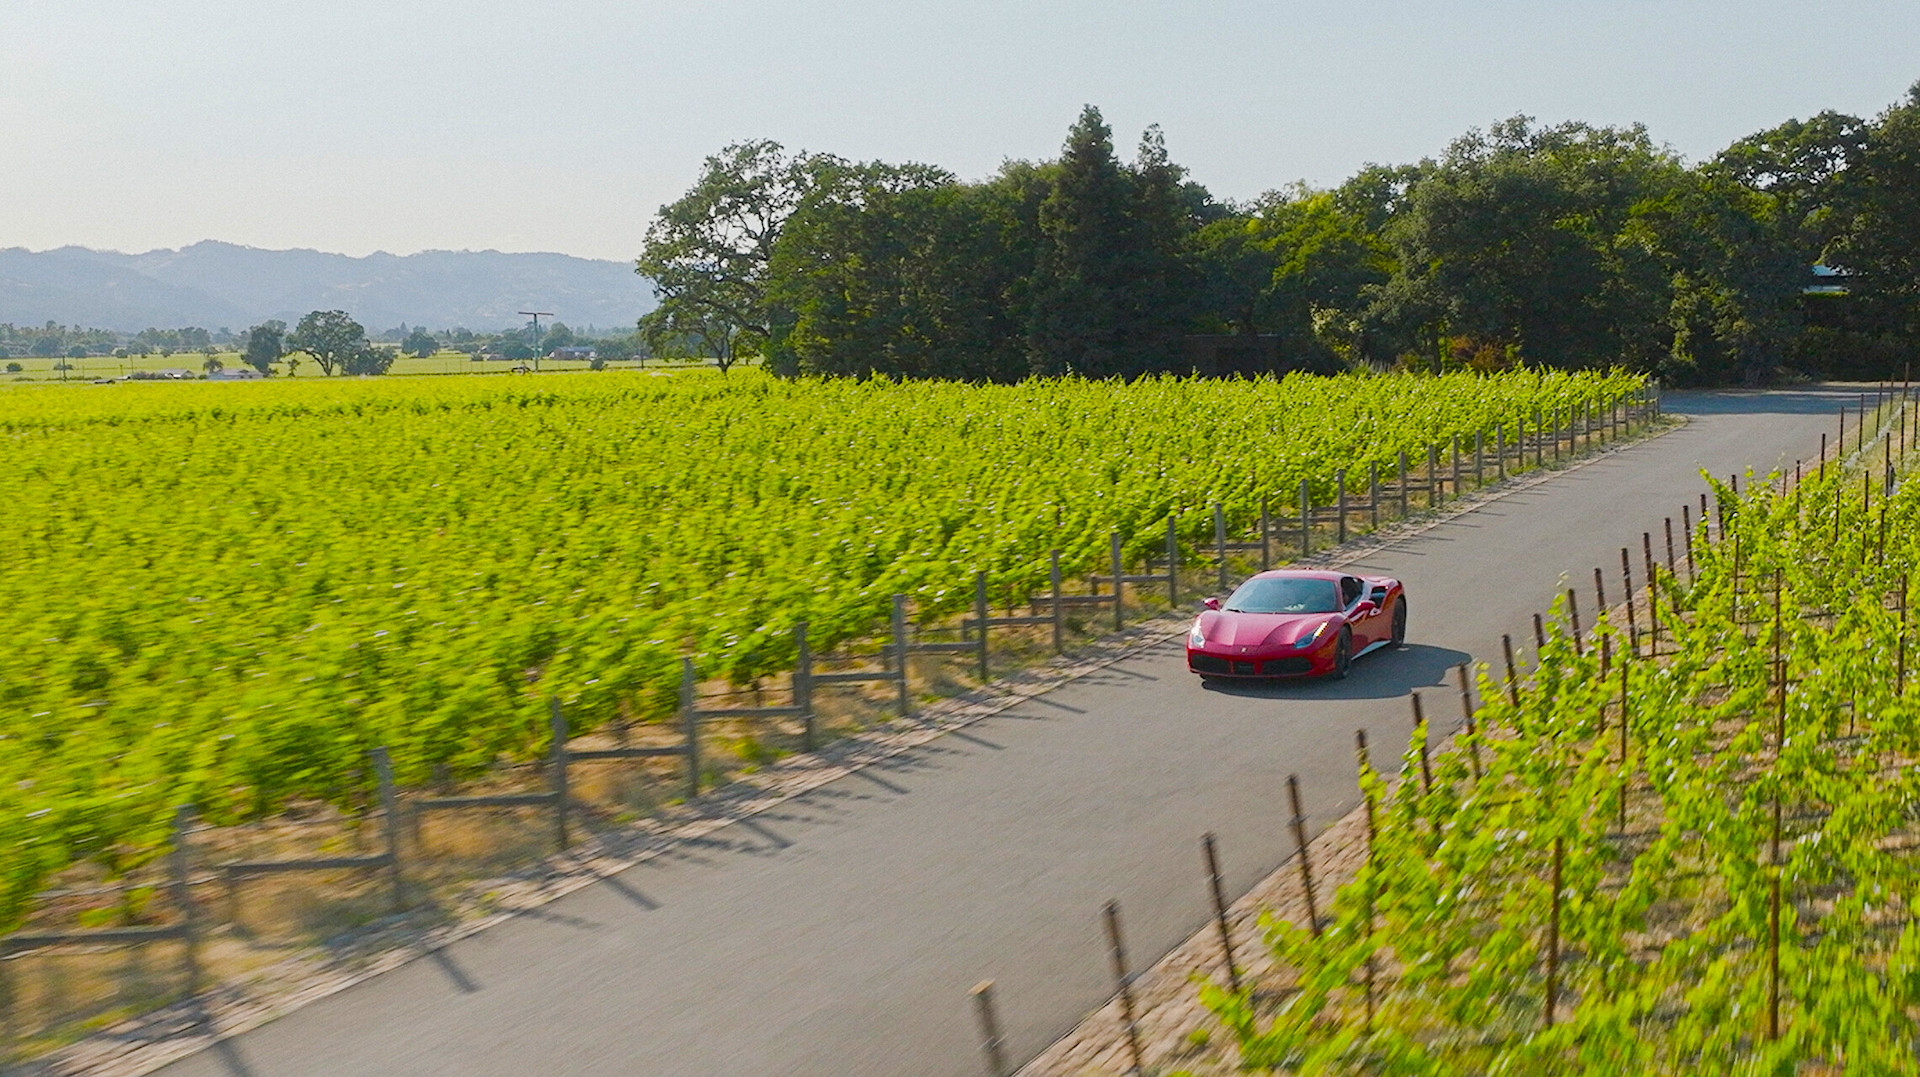 Time to Cruise the Napa Valley